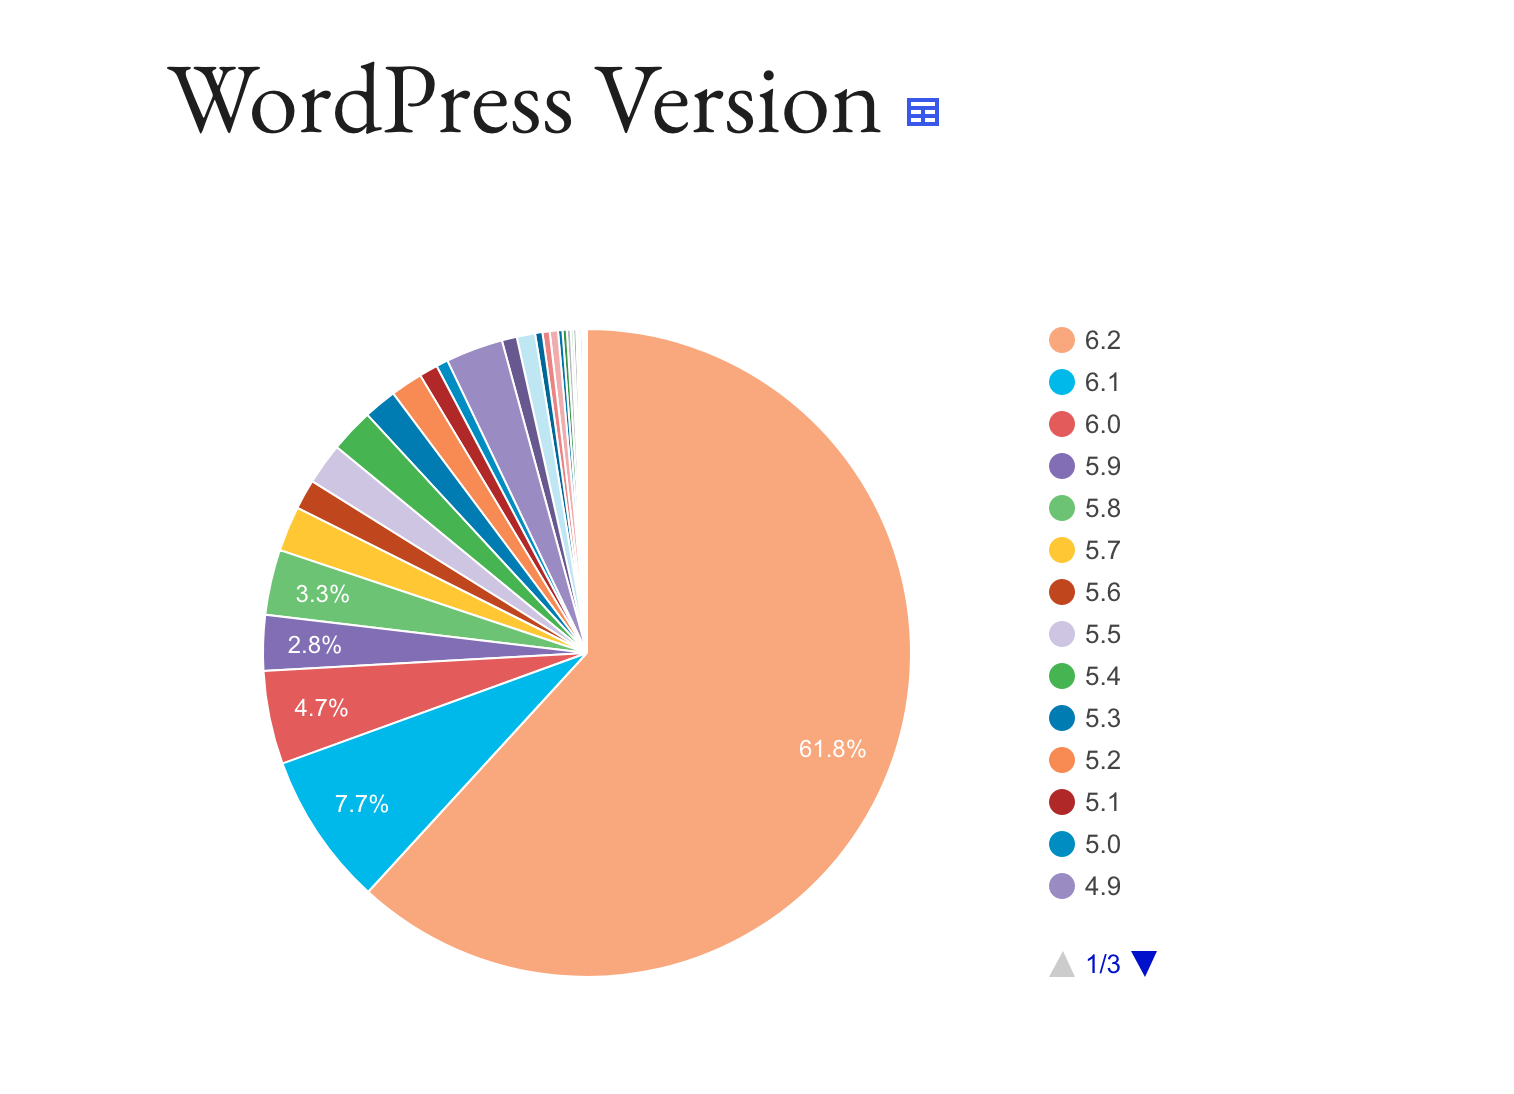 Pie chart of WordPress versions by number of users.